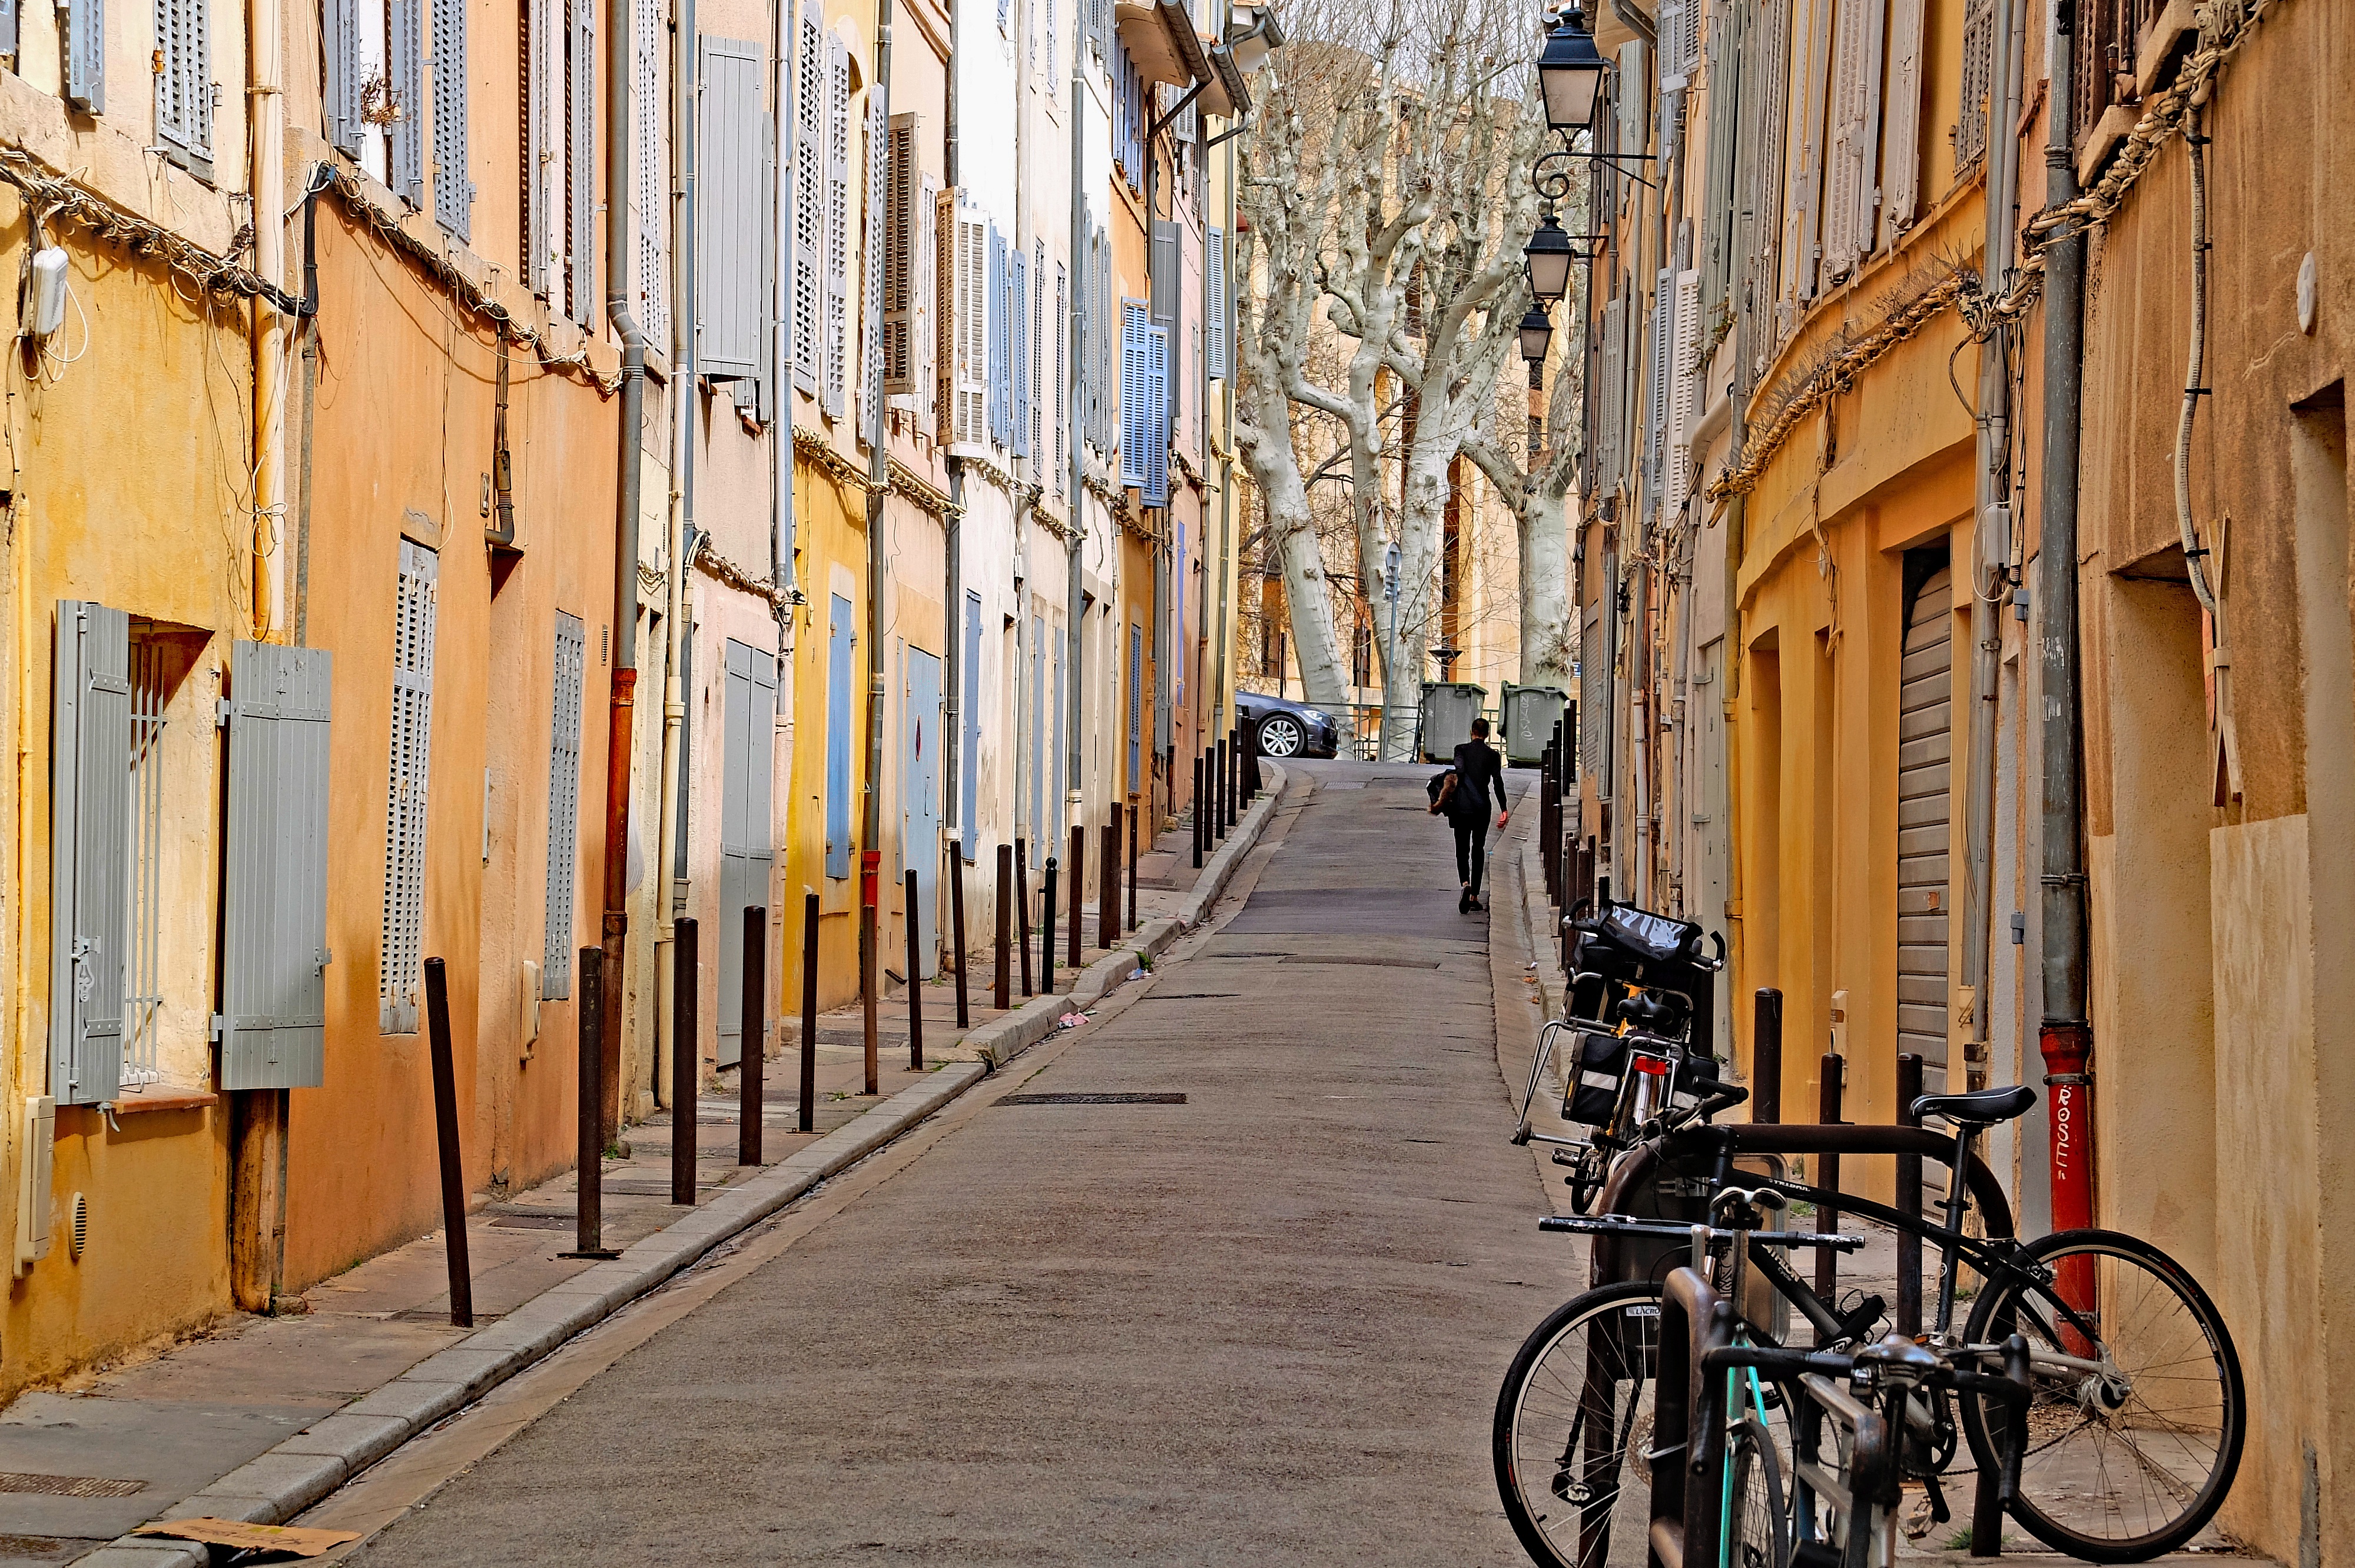 A beautiful pastel-colored street in Aix-en-Provence, France